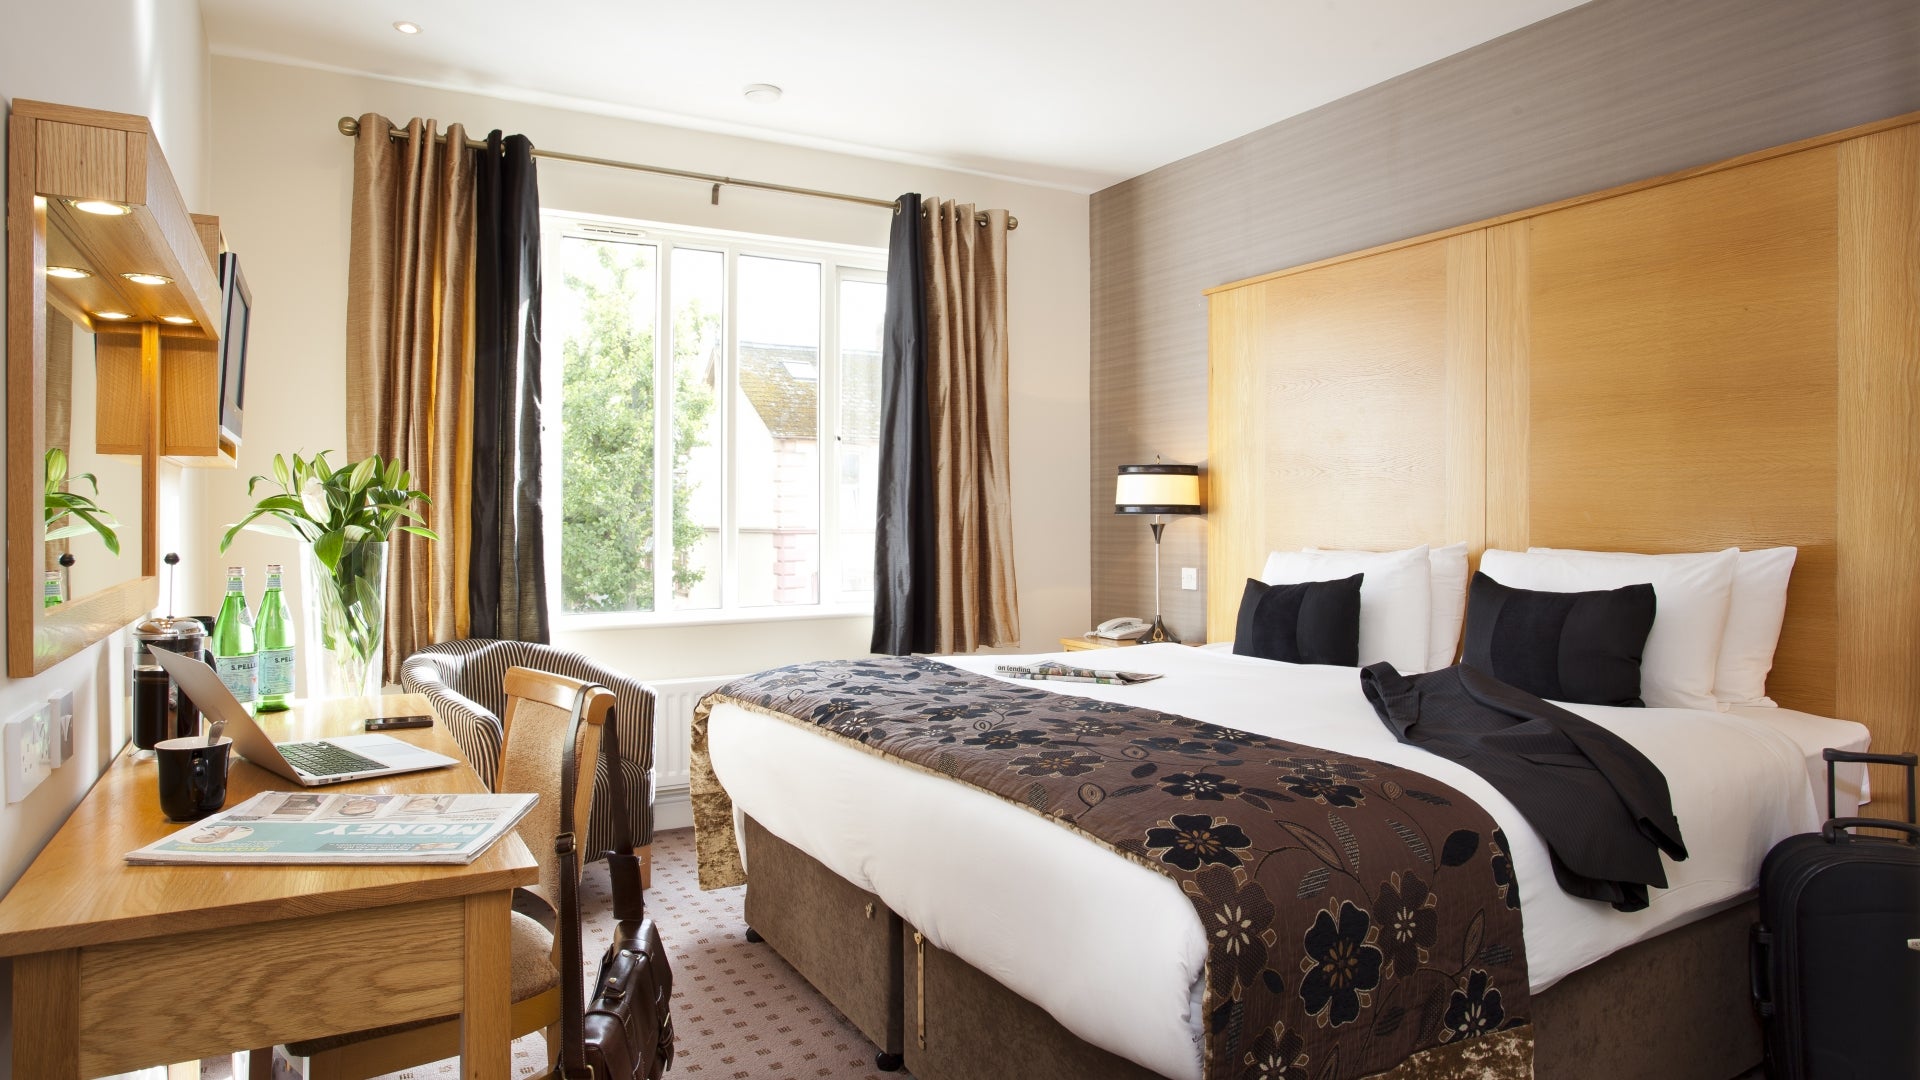 A pioneer of boutique hotels in the city, Tara Lodge continues to impress